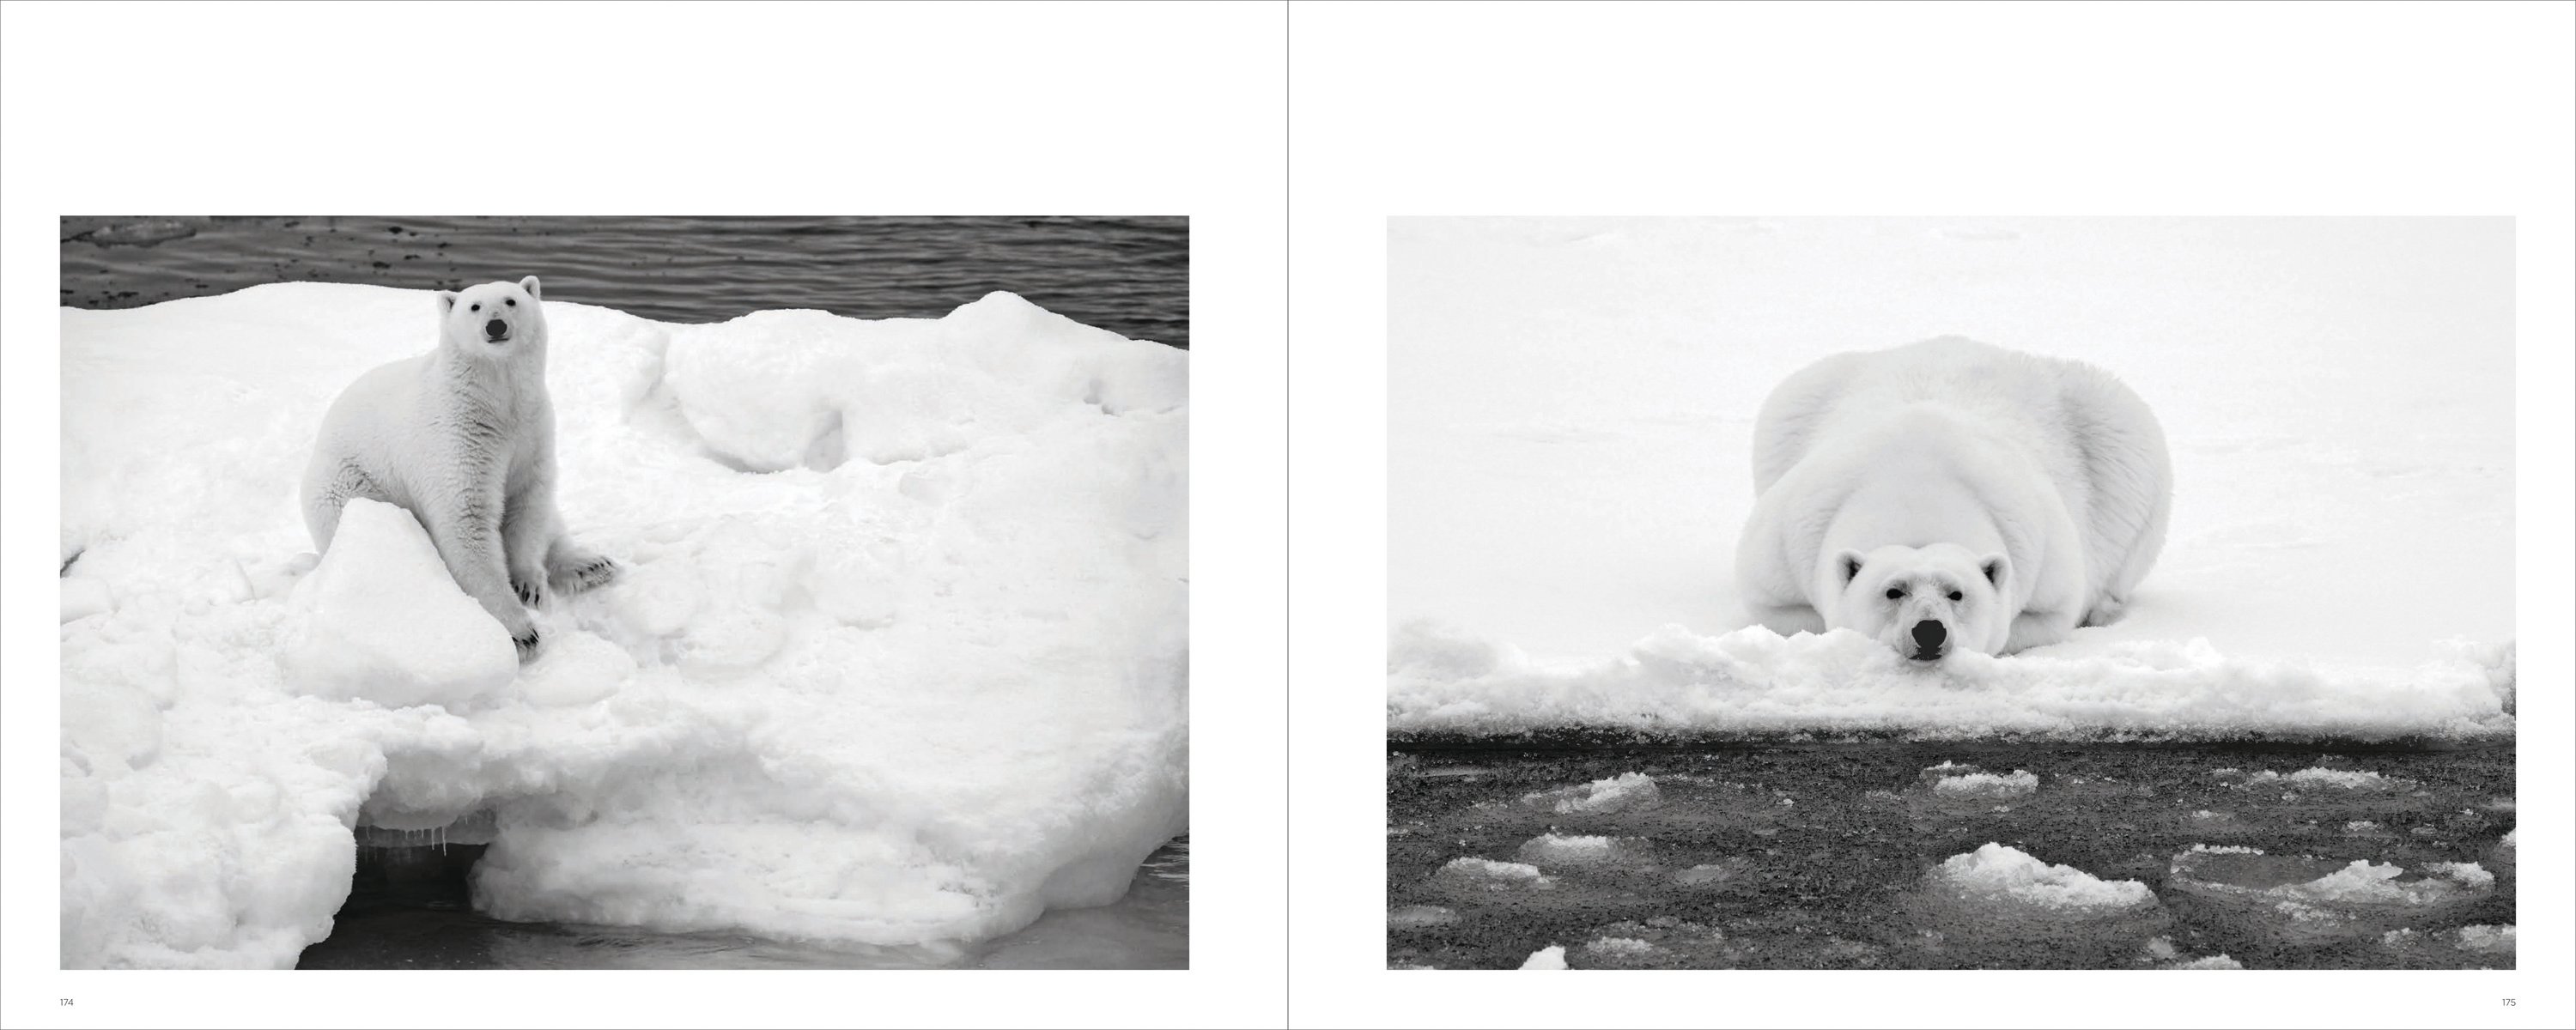 Adult polar bear with two cubs on snow, on cover of 'Polar Bears, A Life Under Threat', by ACC Art Books.